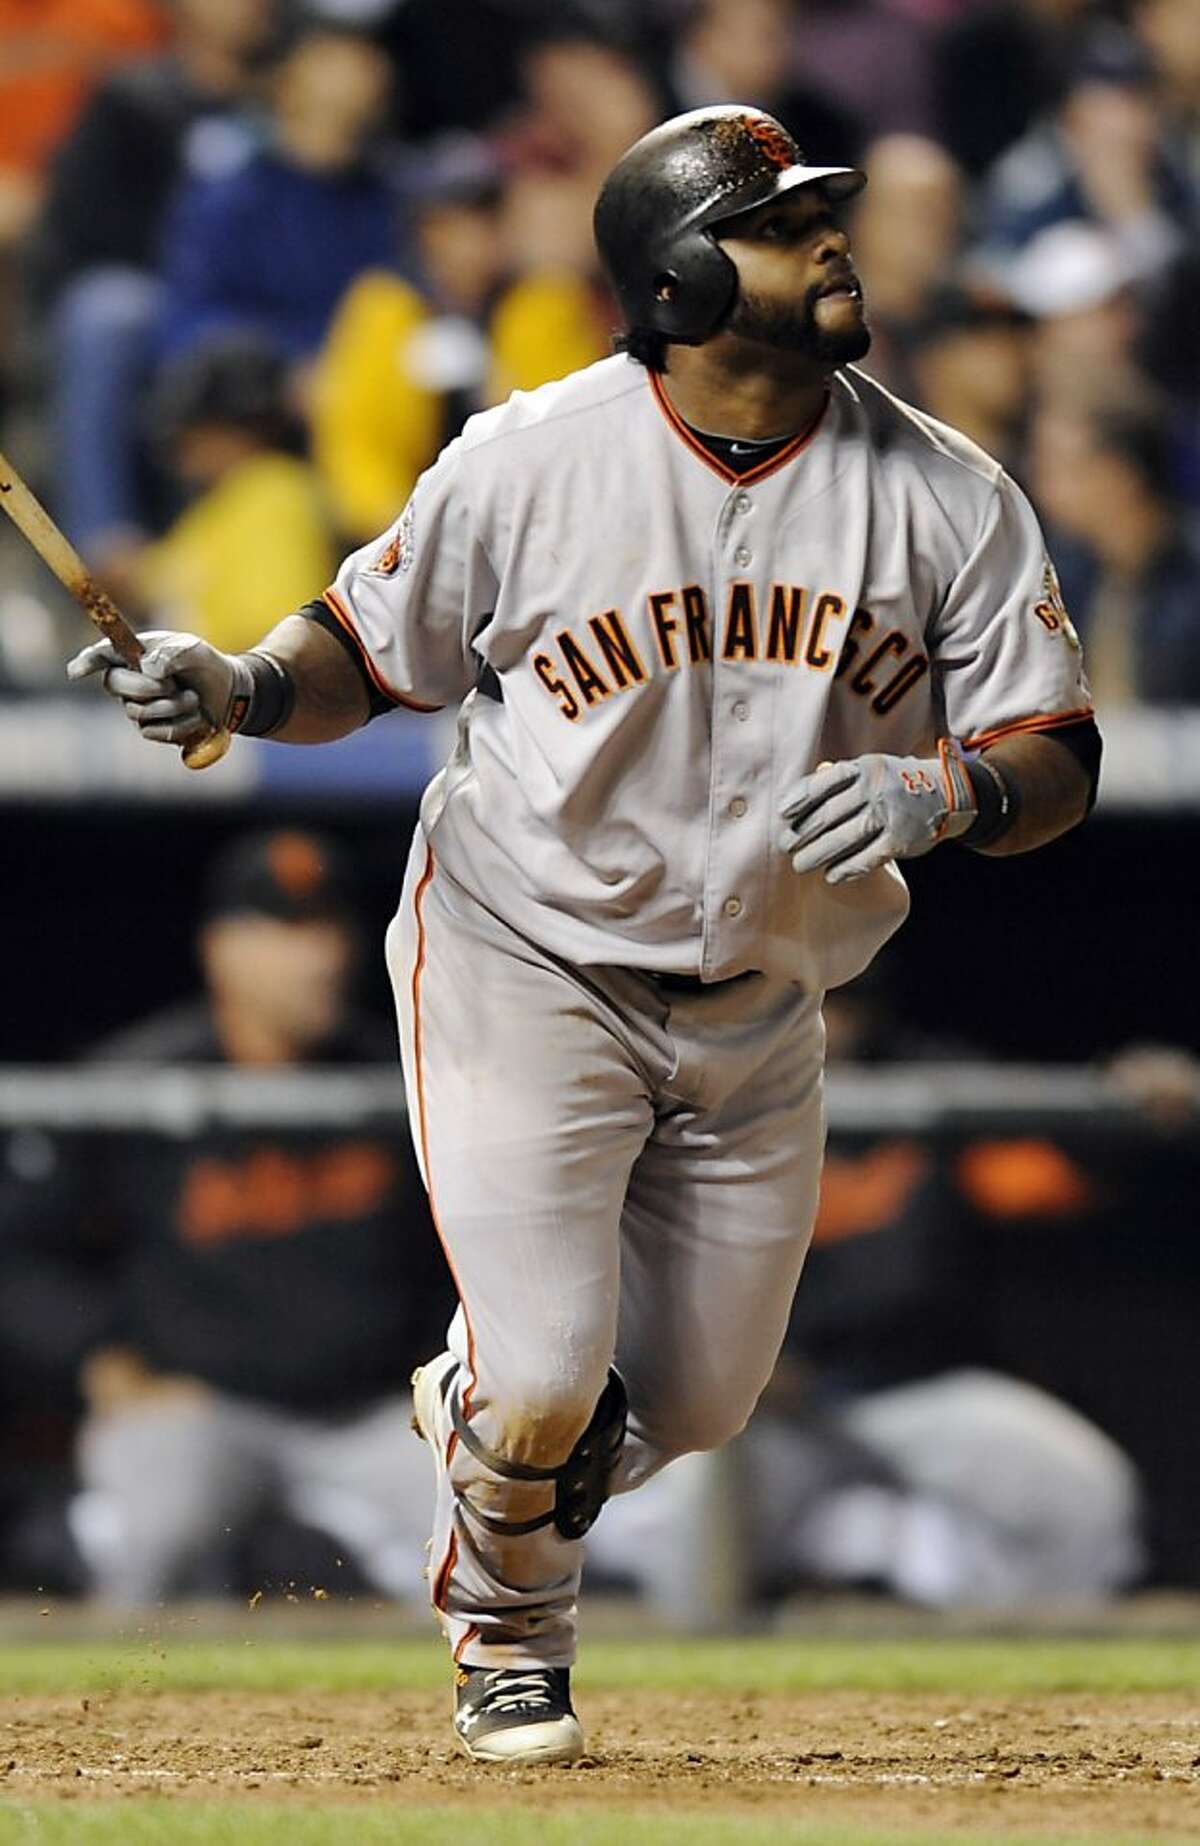 San Francisco Giants' Pablo Sandoval watches his triple off Colorado Rockies starting pitcher Jhoulys Chacin during the sixth inning of a baseball game Thursday, Sept. 15, 2011, in Denver. (AP Photo/Jack Dempsey)